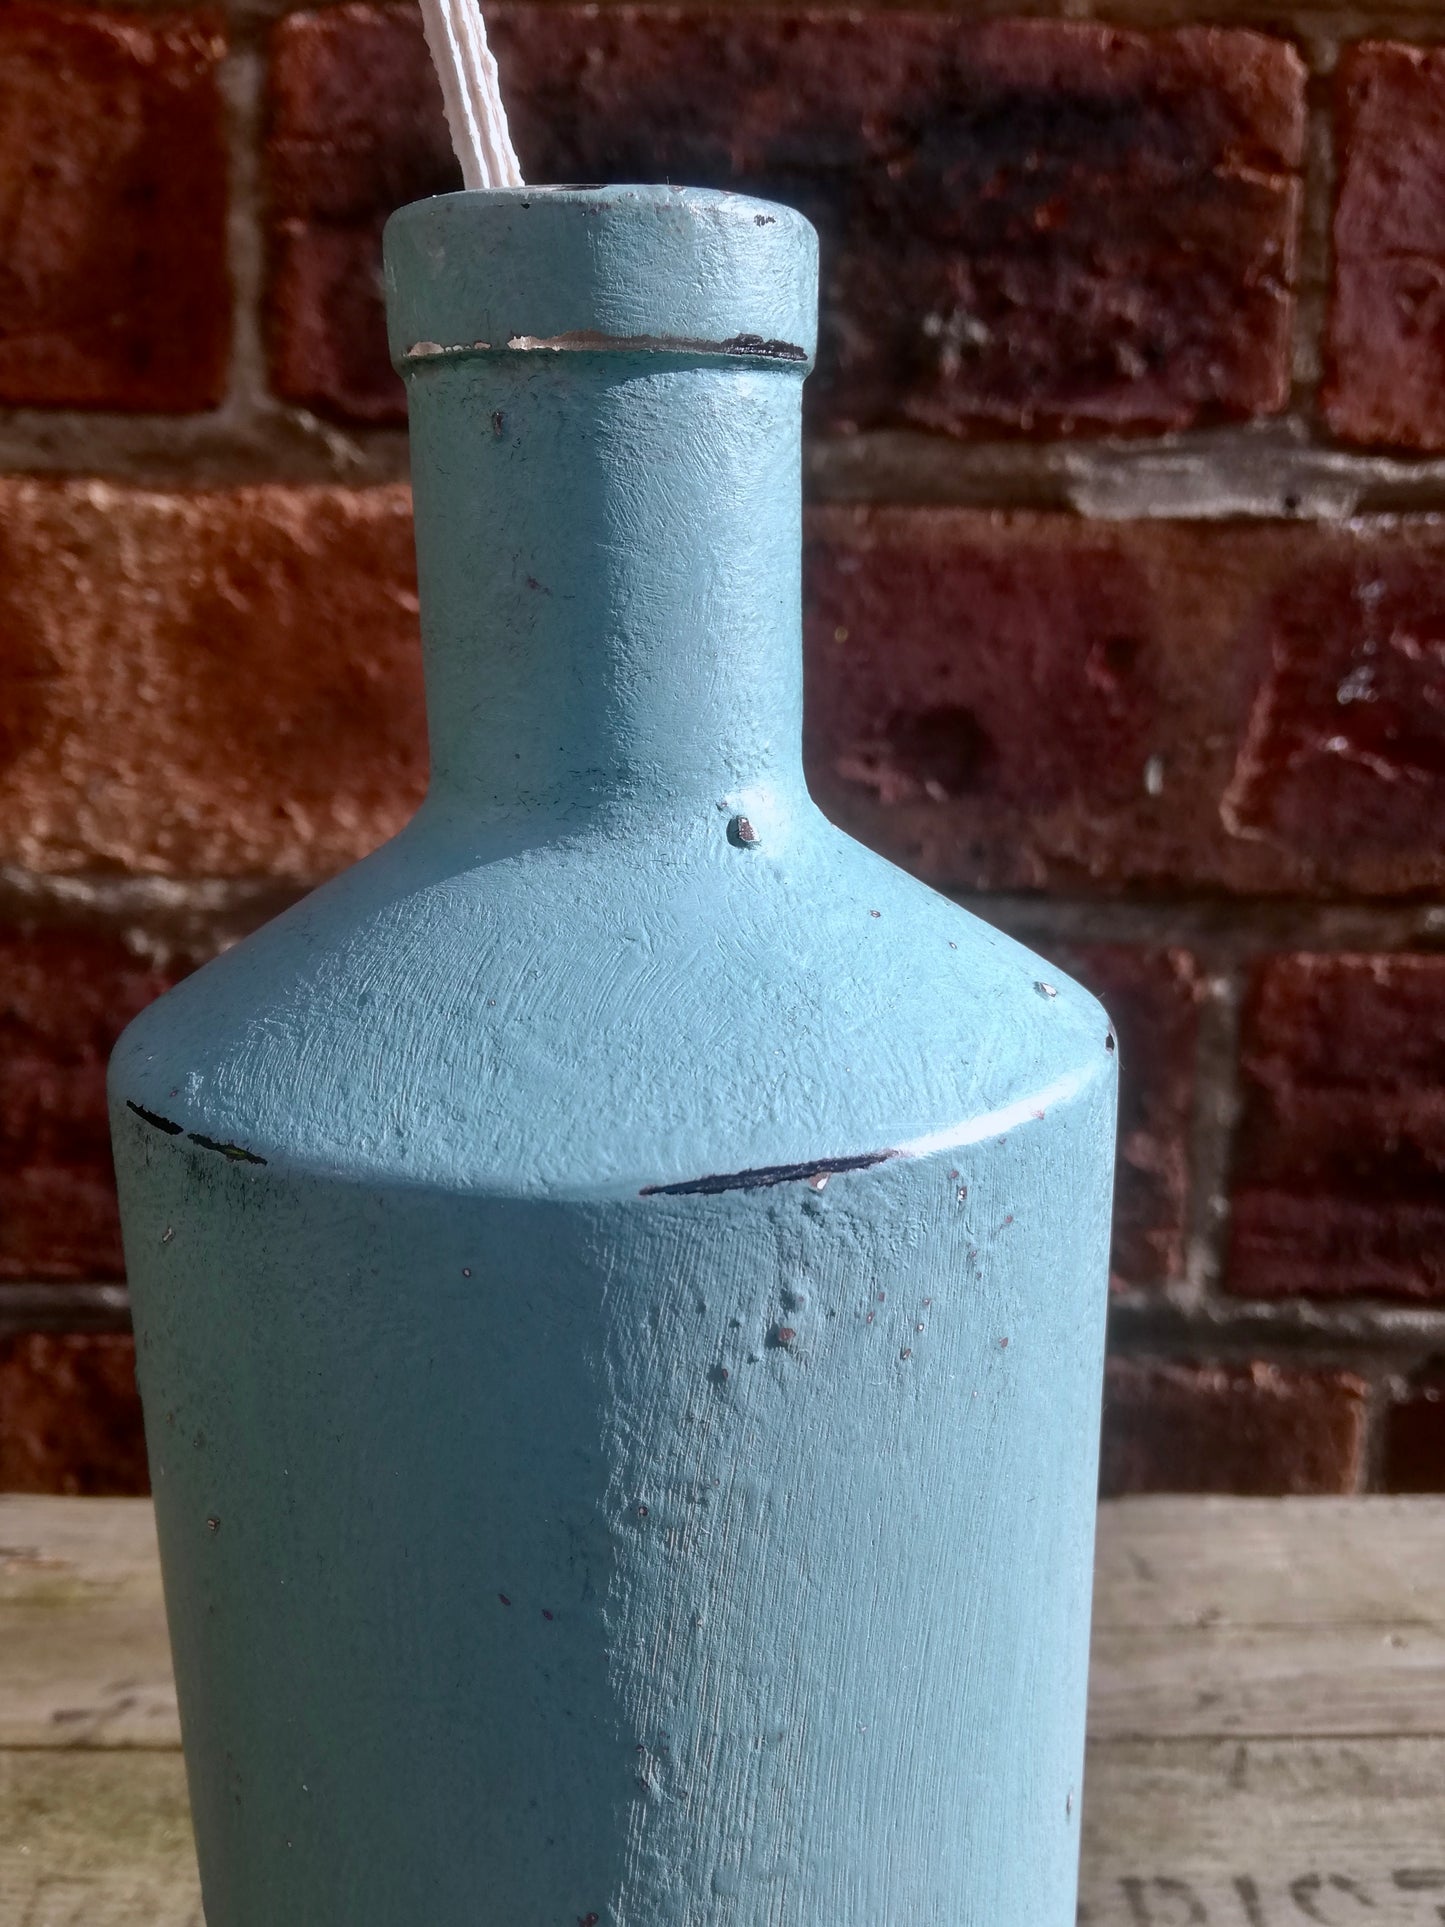 Bottle bud vase painted in textured chalk paint ad polished with wax